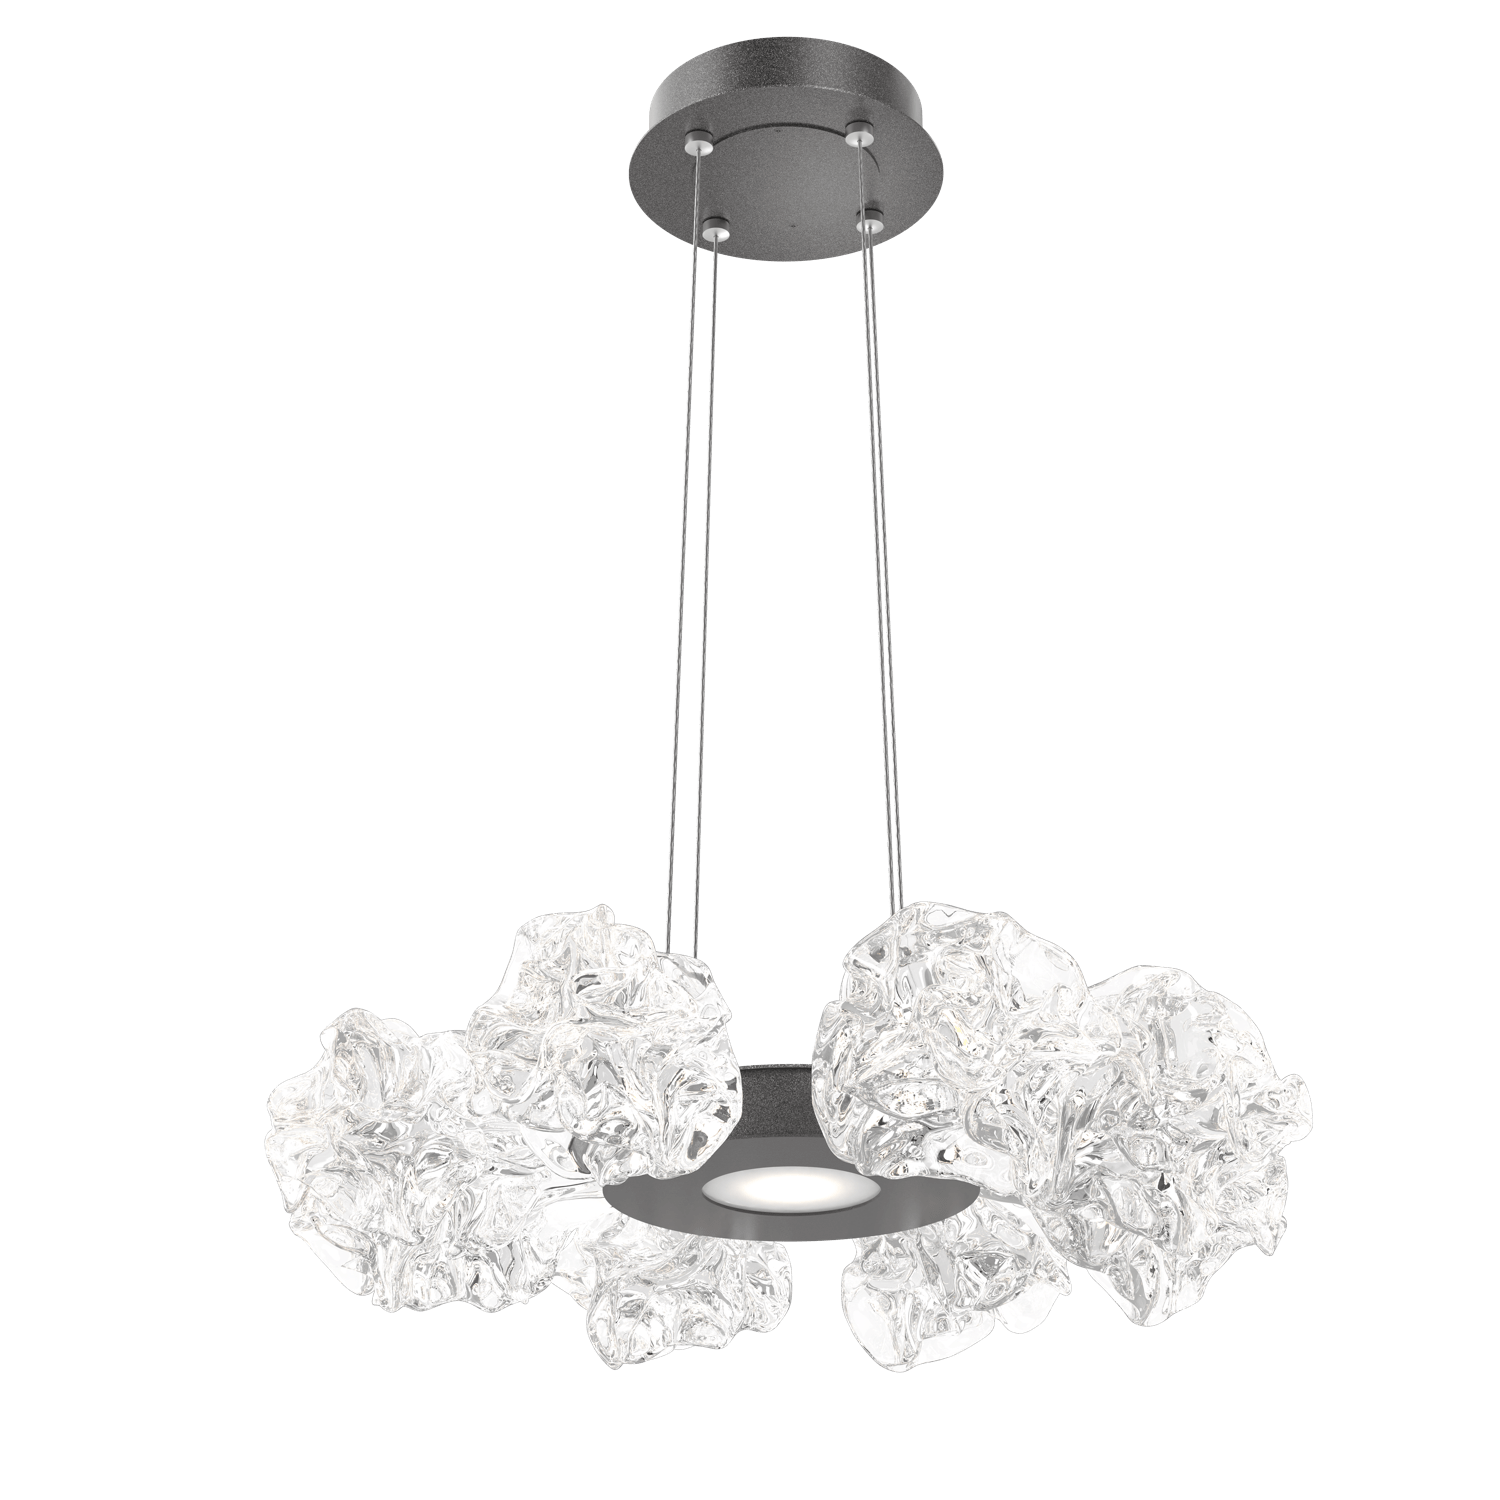 CHB0059-24-GP-Hammerton-Studio-Blossom-24-inch-radial-ring-chandelier-with-graphite-finish-and-clear-handblown-crystal-glass-shades-and-LED-lamping